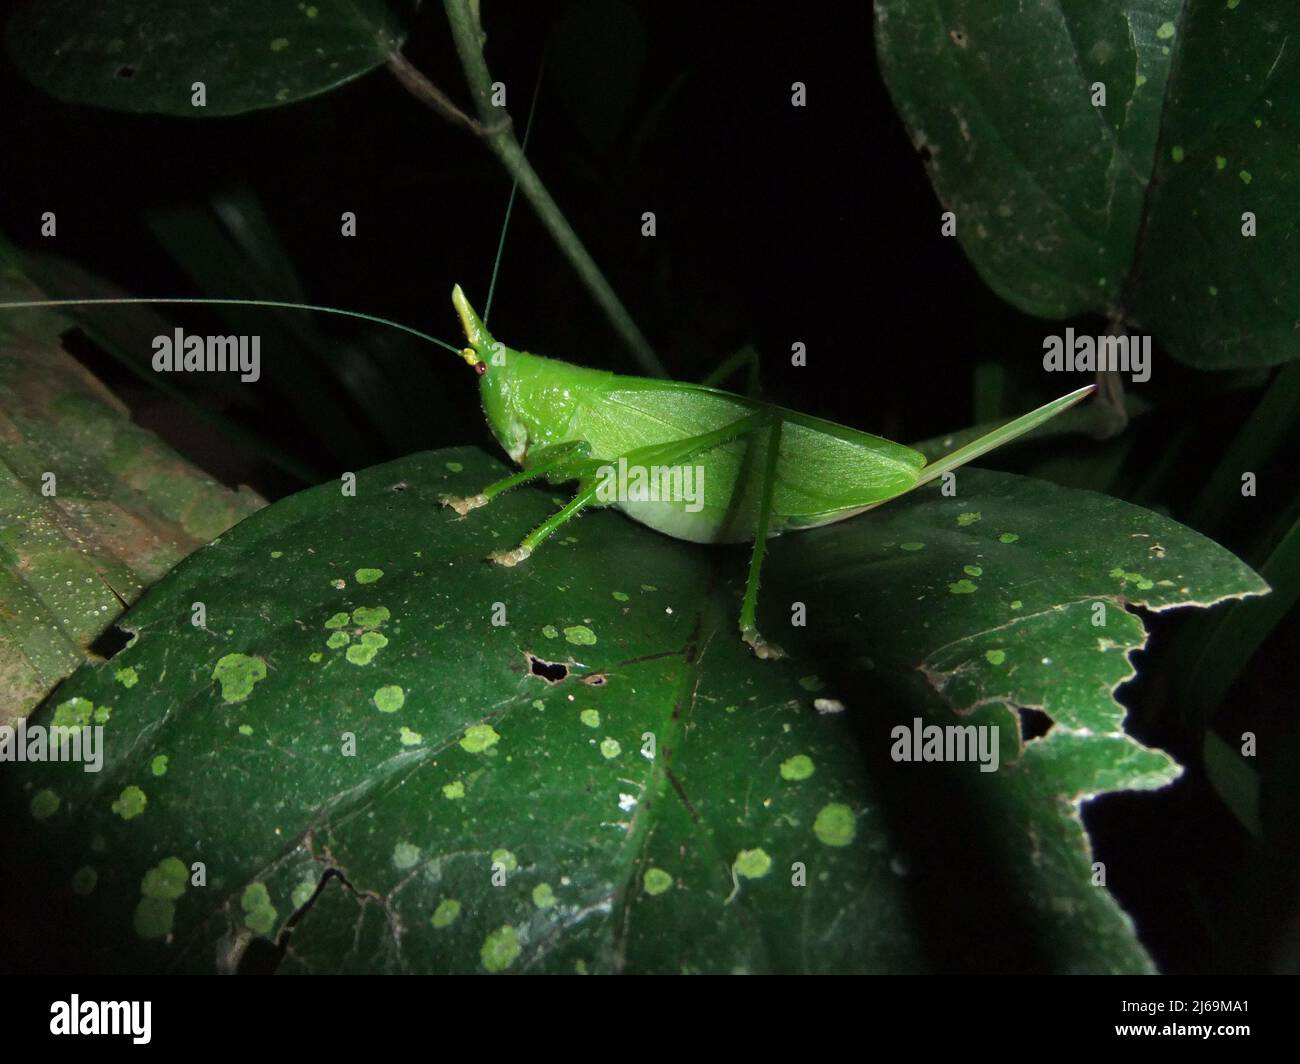 Katydid (family Tettigoniidae) isolated on a natural dark leaf background from the jungles of Belize, Central America Stock Photo